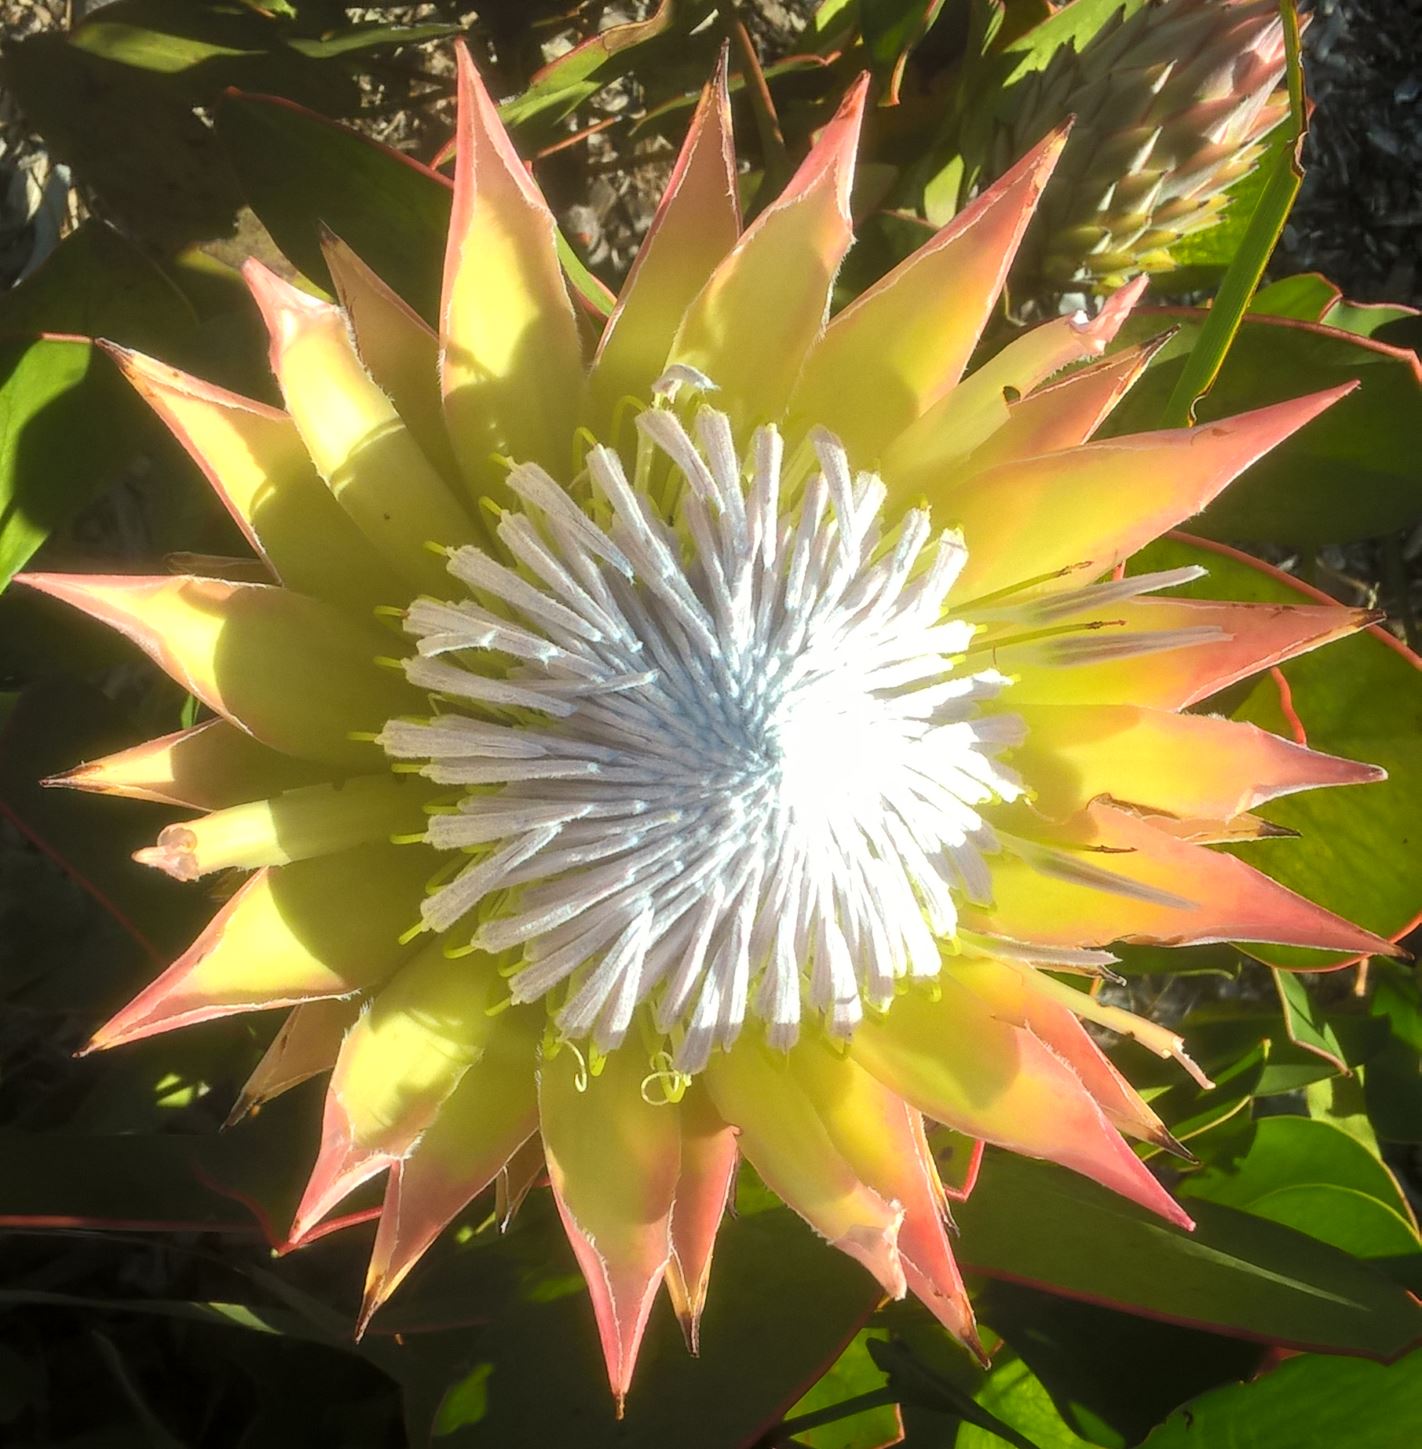 a protea, the national flower of South Africa